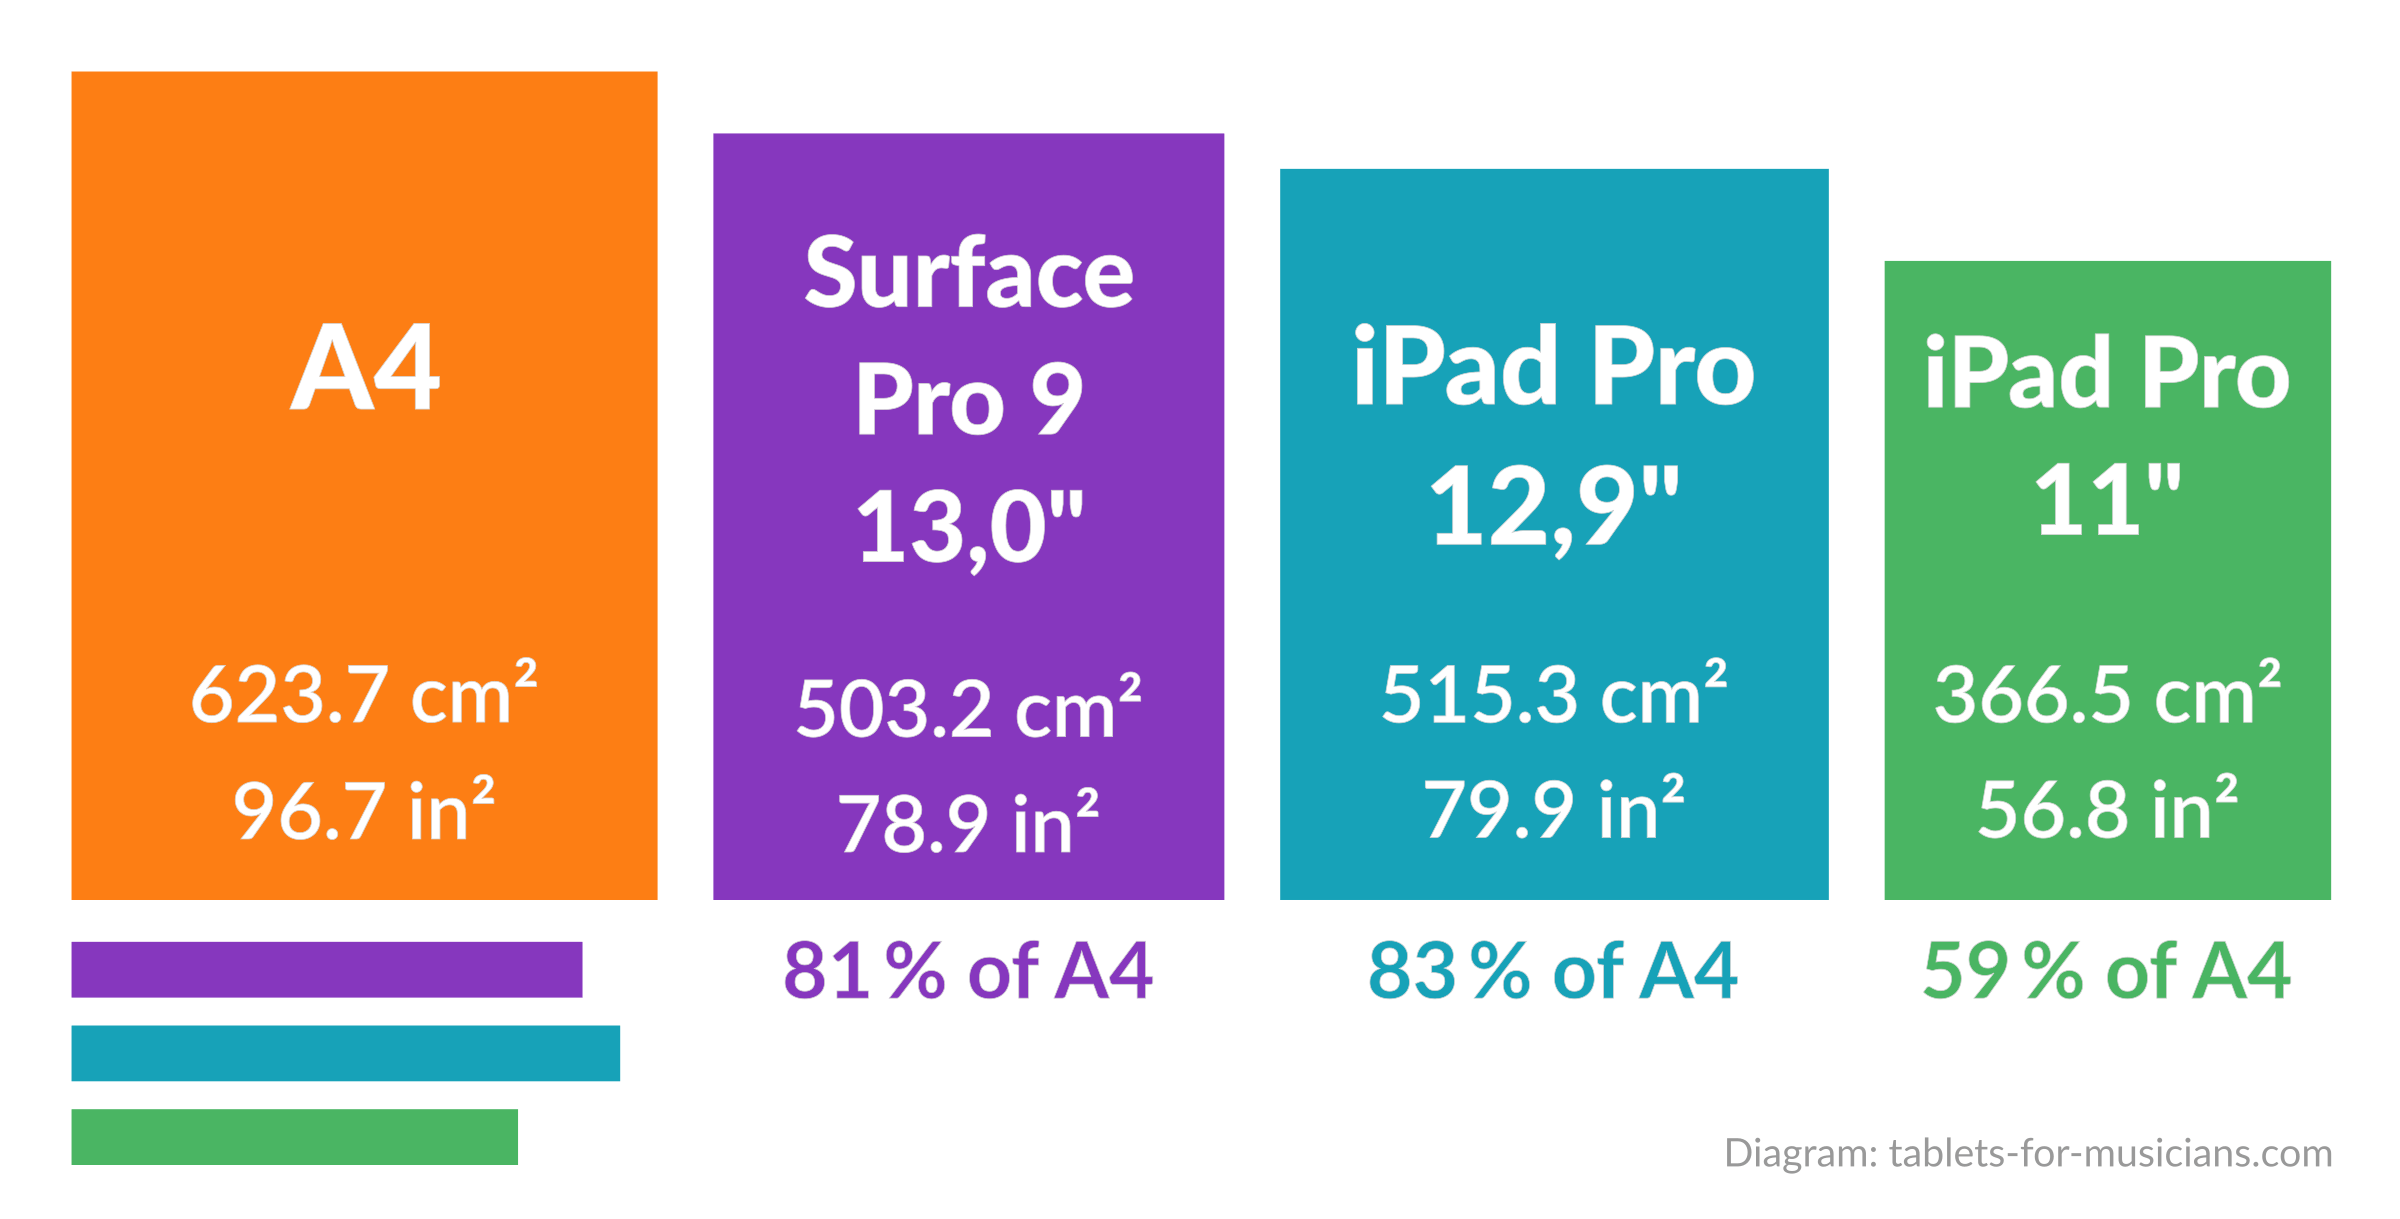 Music on tablet - Tablet size for sheet music - A4 format vs Surface Pro 9 vs iPad Pro